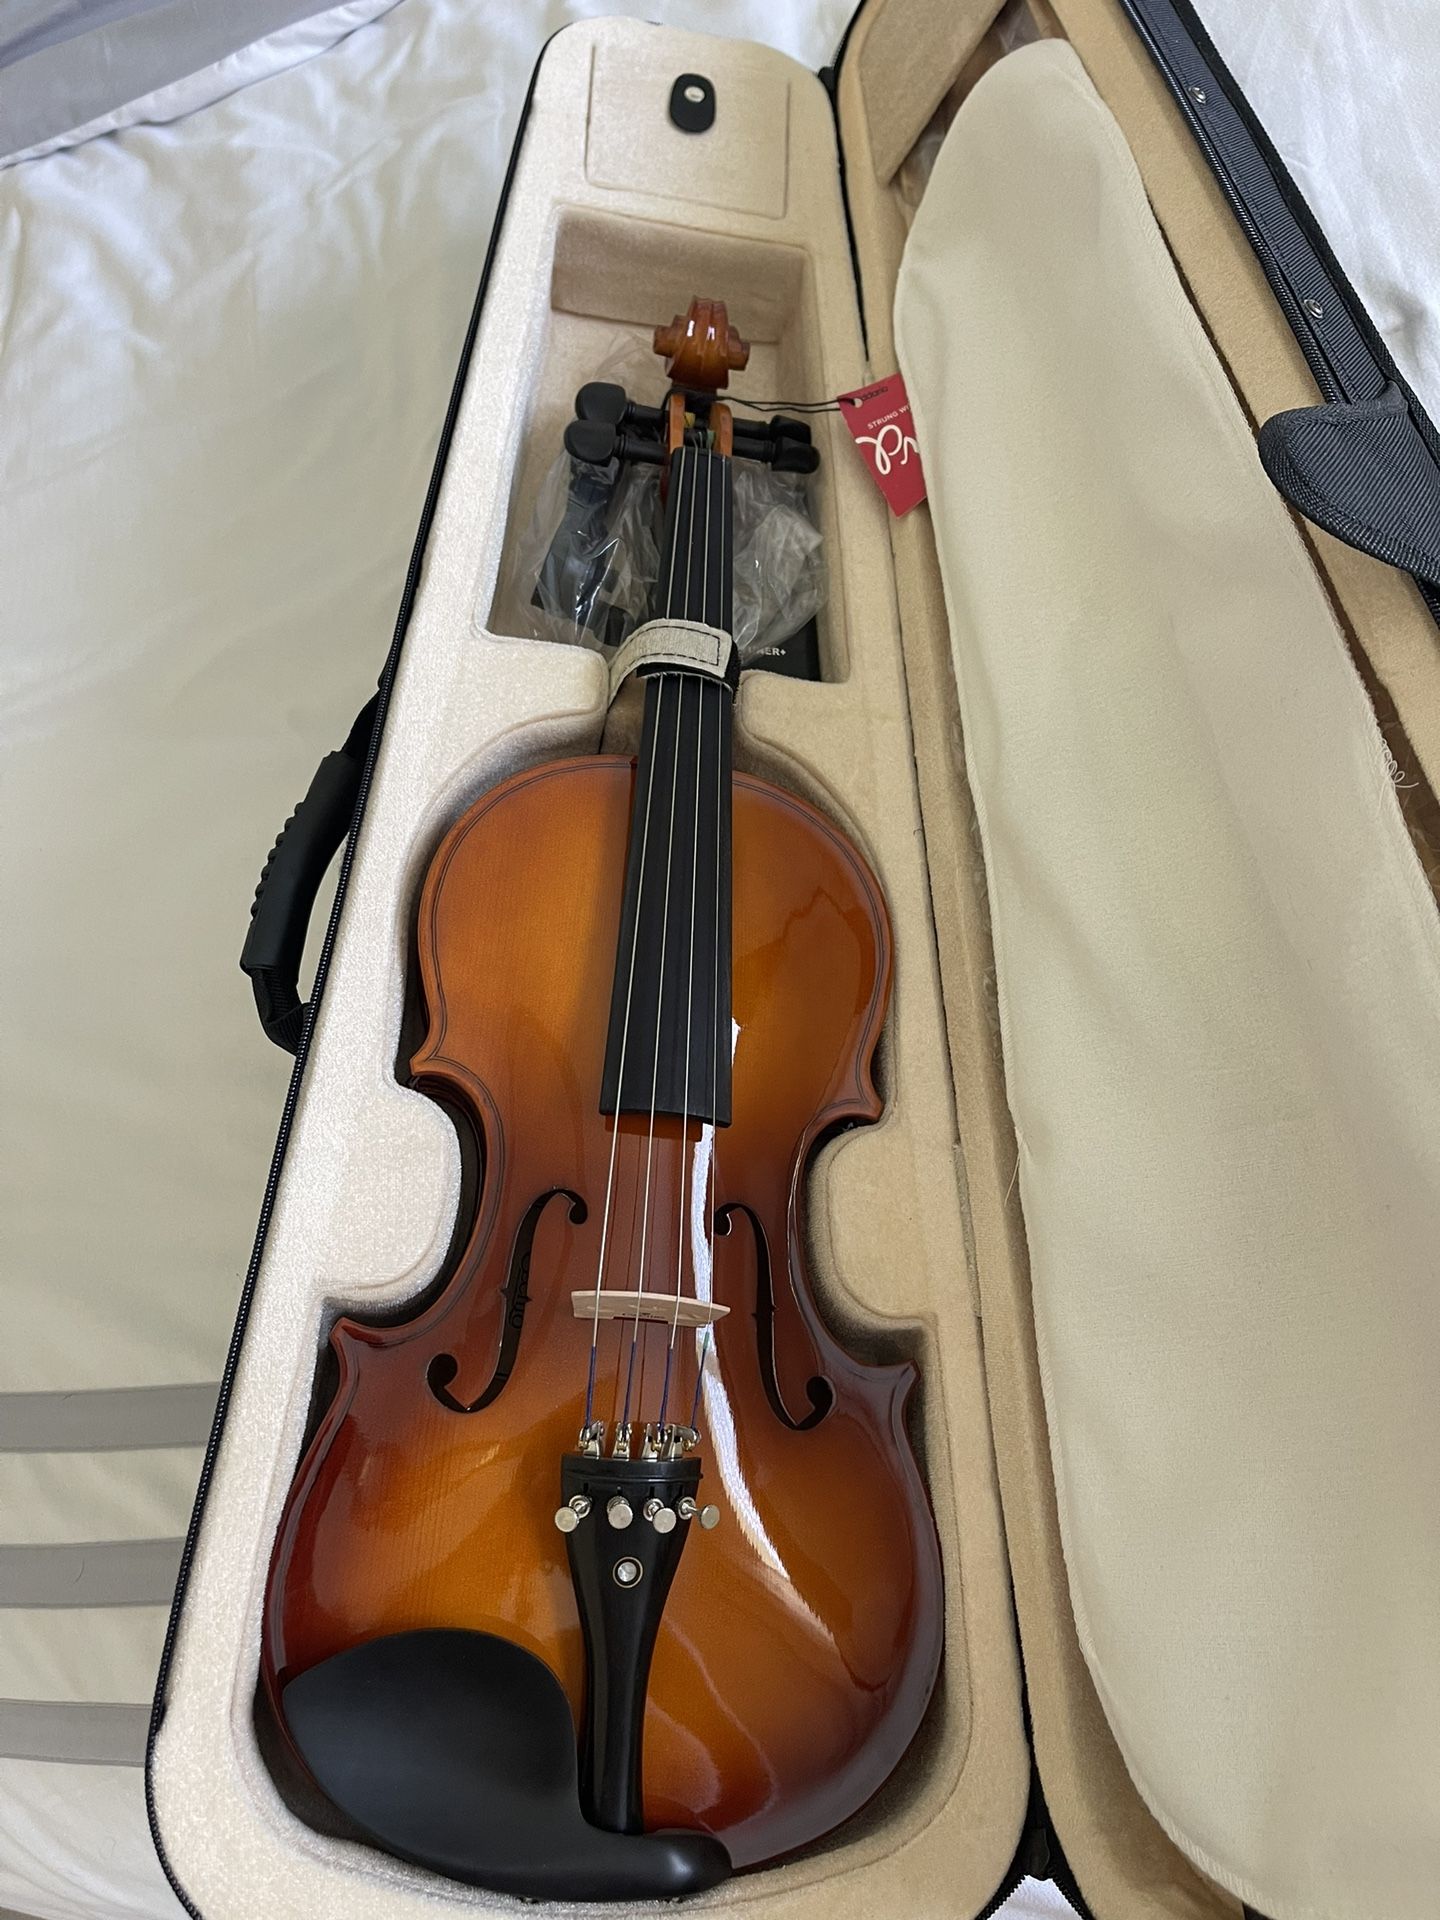 NEW VIOLIN WITH CASE!!!